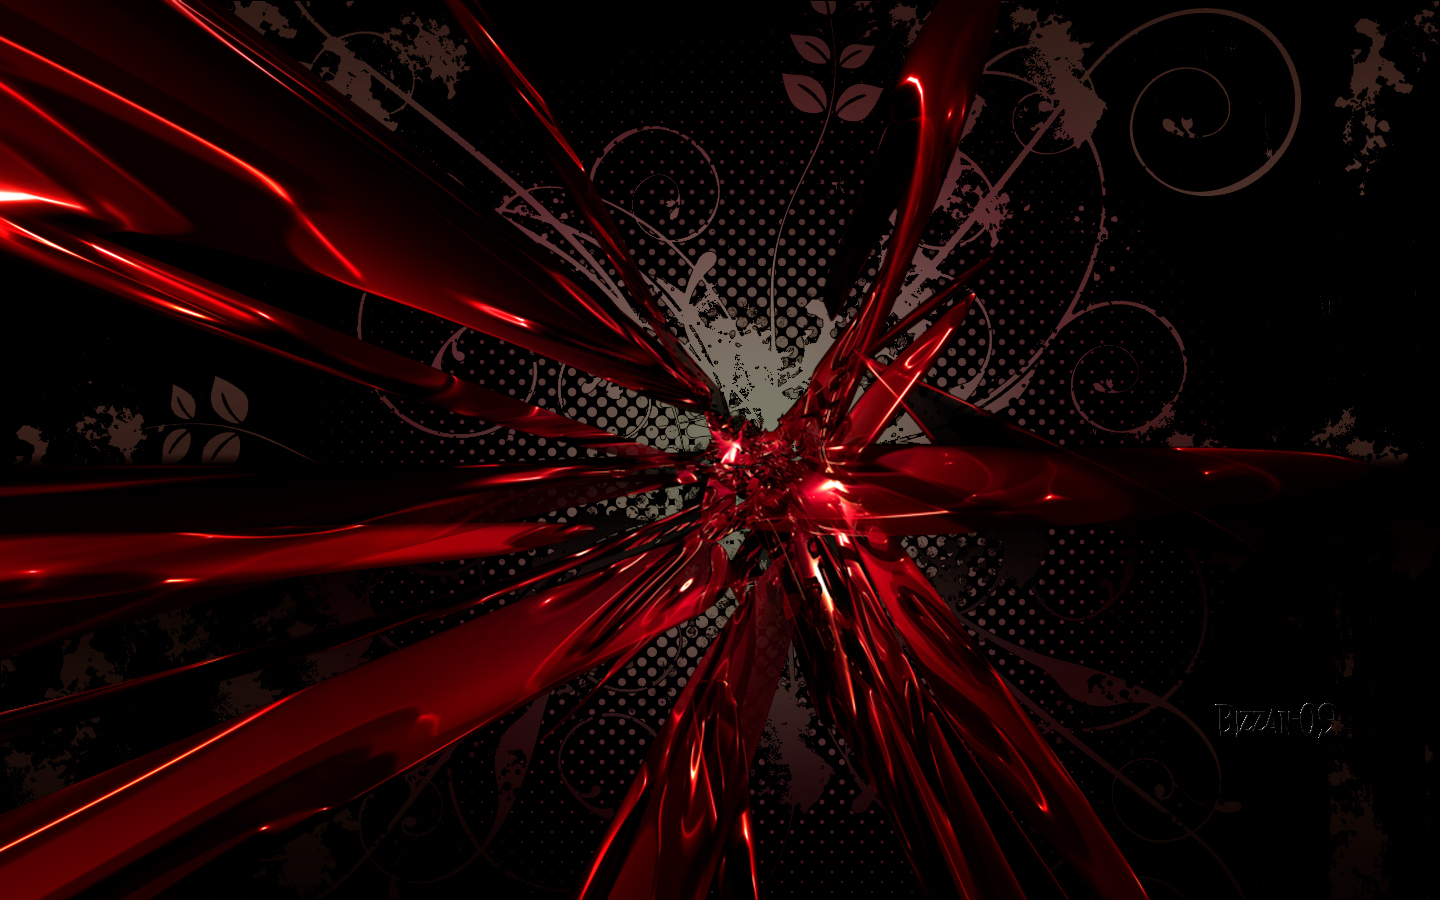 29 awesome black themed abstract wallpapers vol2 1 Design Utopia